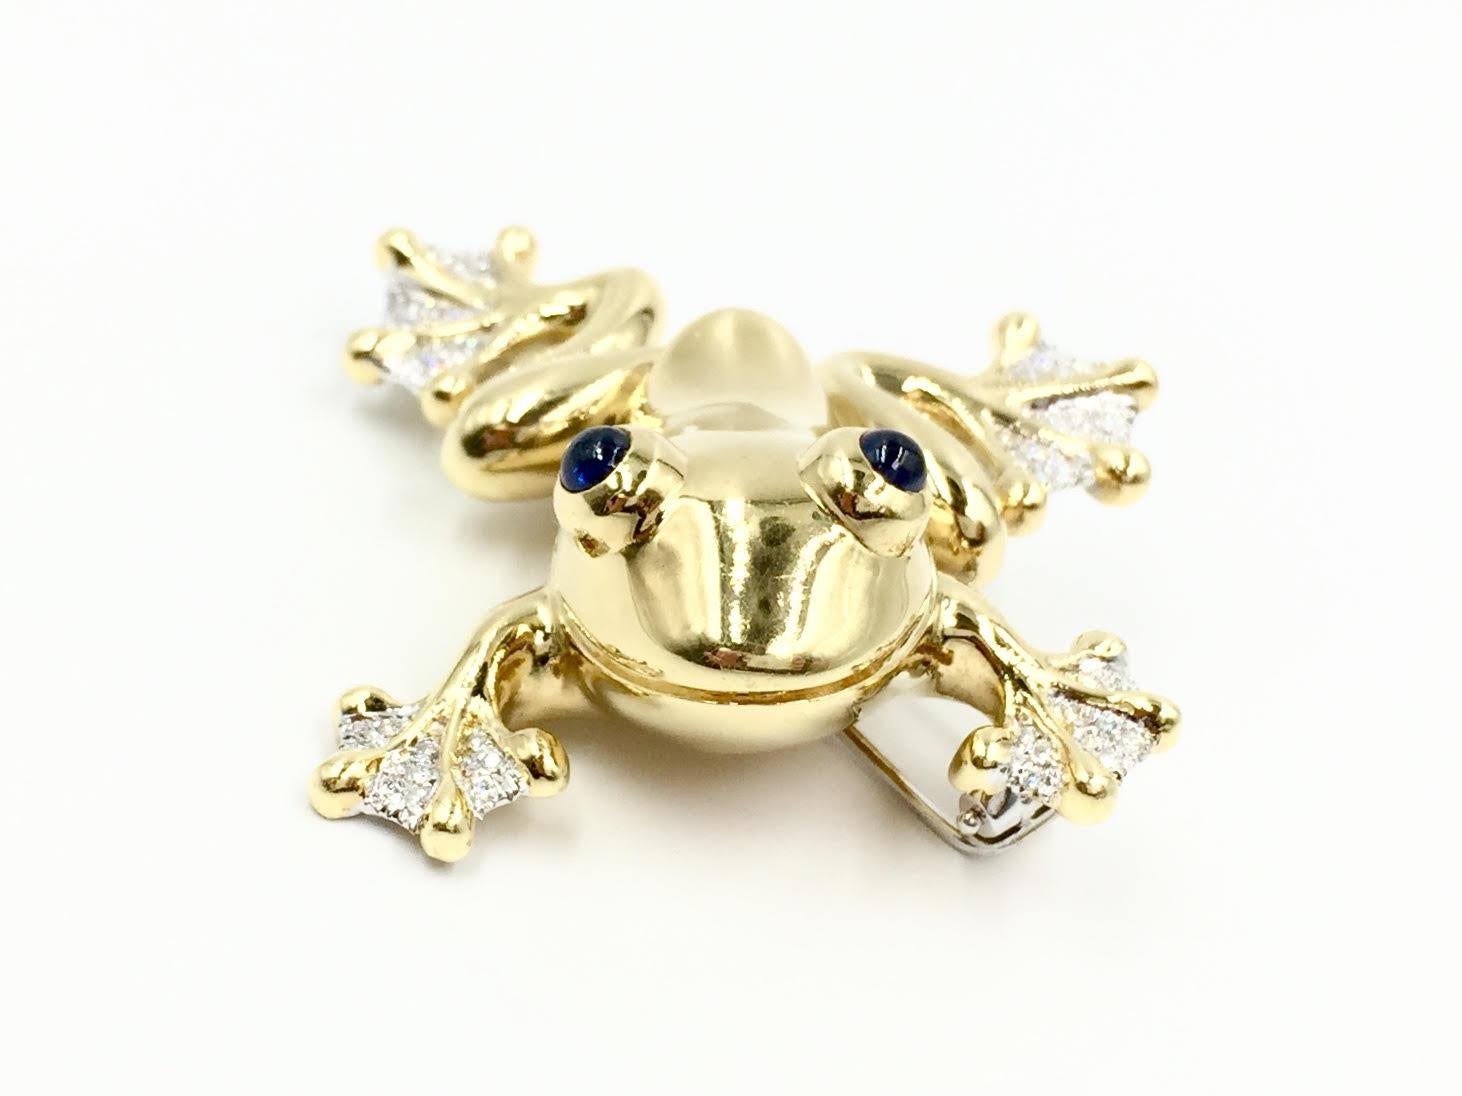 A substantial and well made 18 karat gold frog brooch with three dimensional design. Frog has a lot of character with a smiling face and round cabochon vivid blue sapphires eyes. Approximately 1.02 carats of diamonds are set on the toes in white